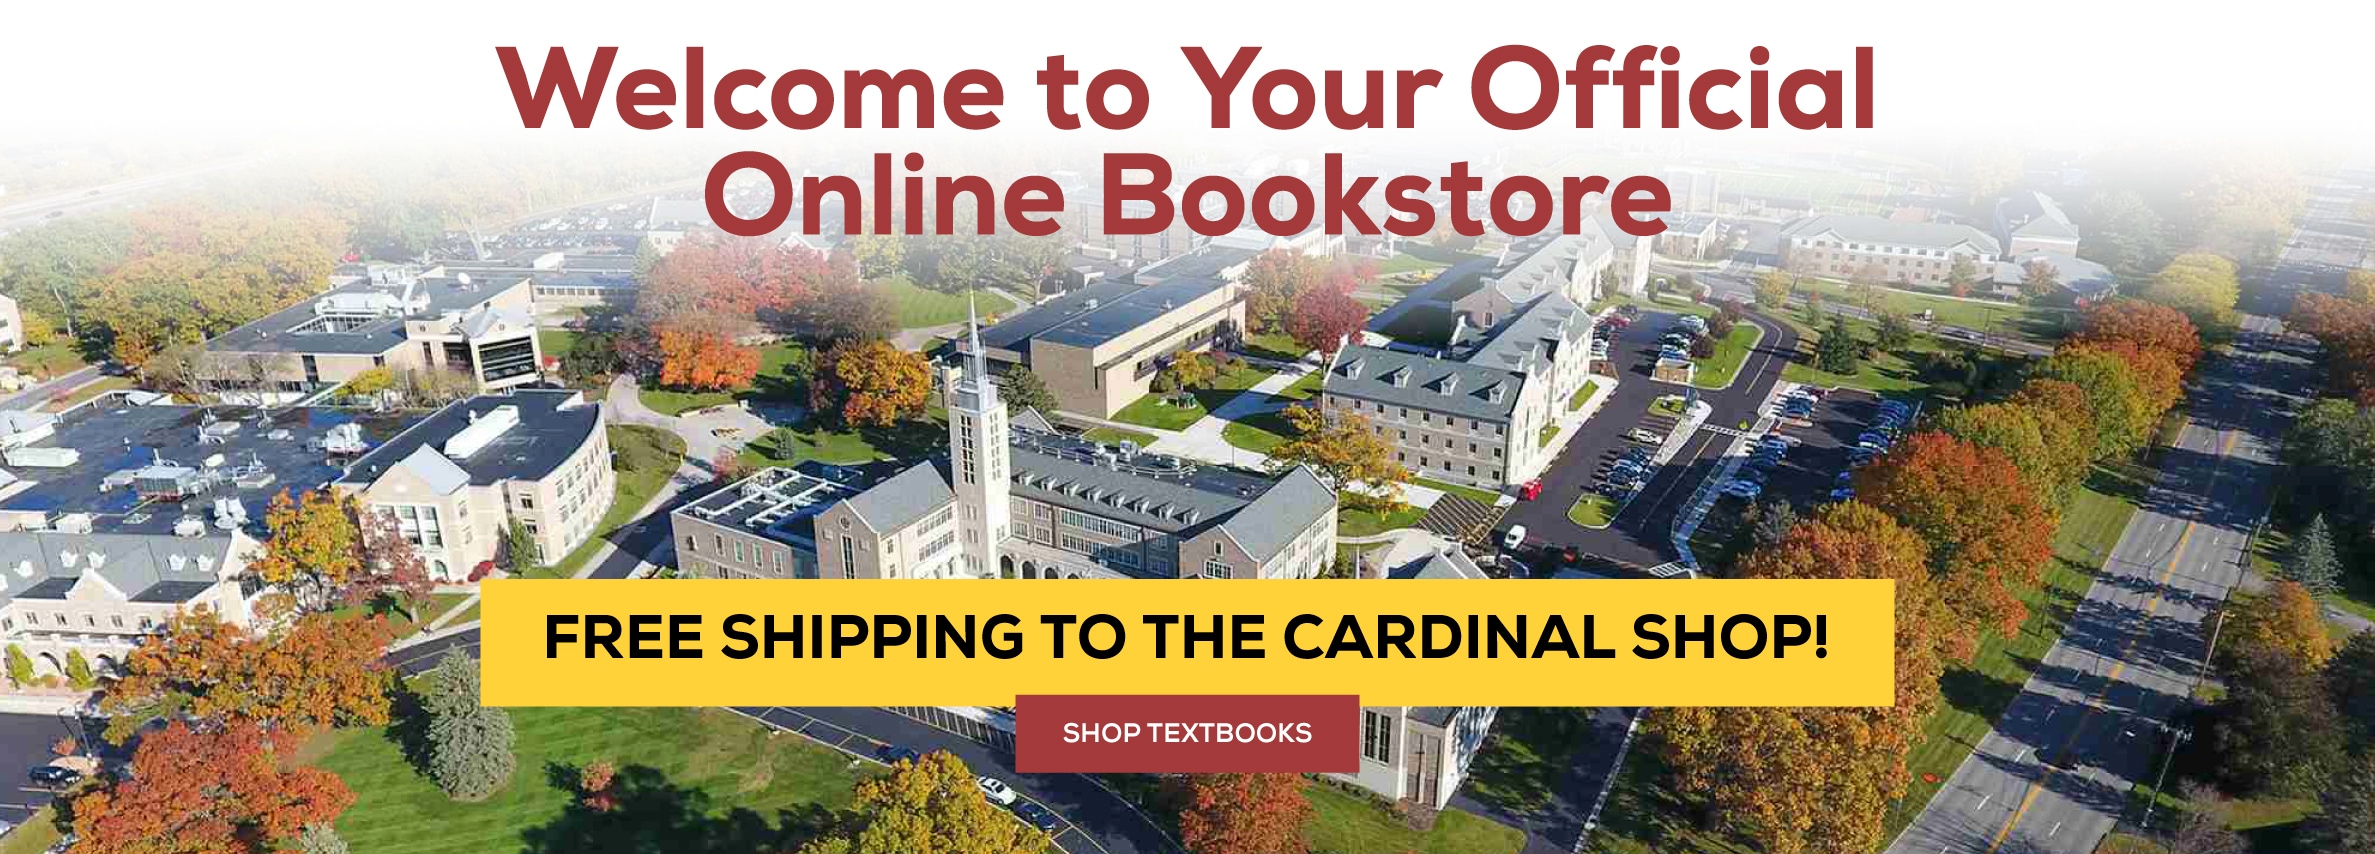 Welcome to Your New Online Bookstore. Free Shipping to the Cardinal Shop. Shop Textbooks.